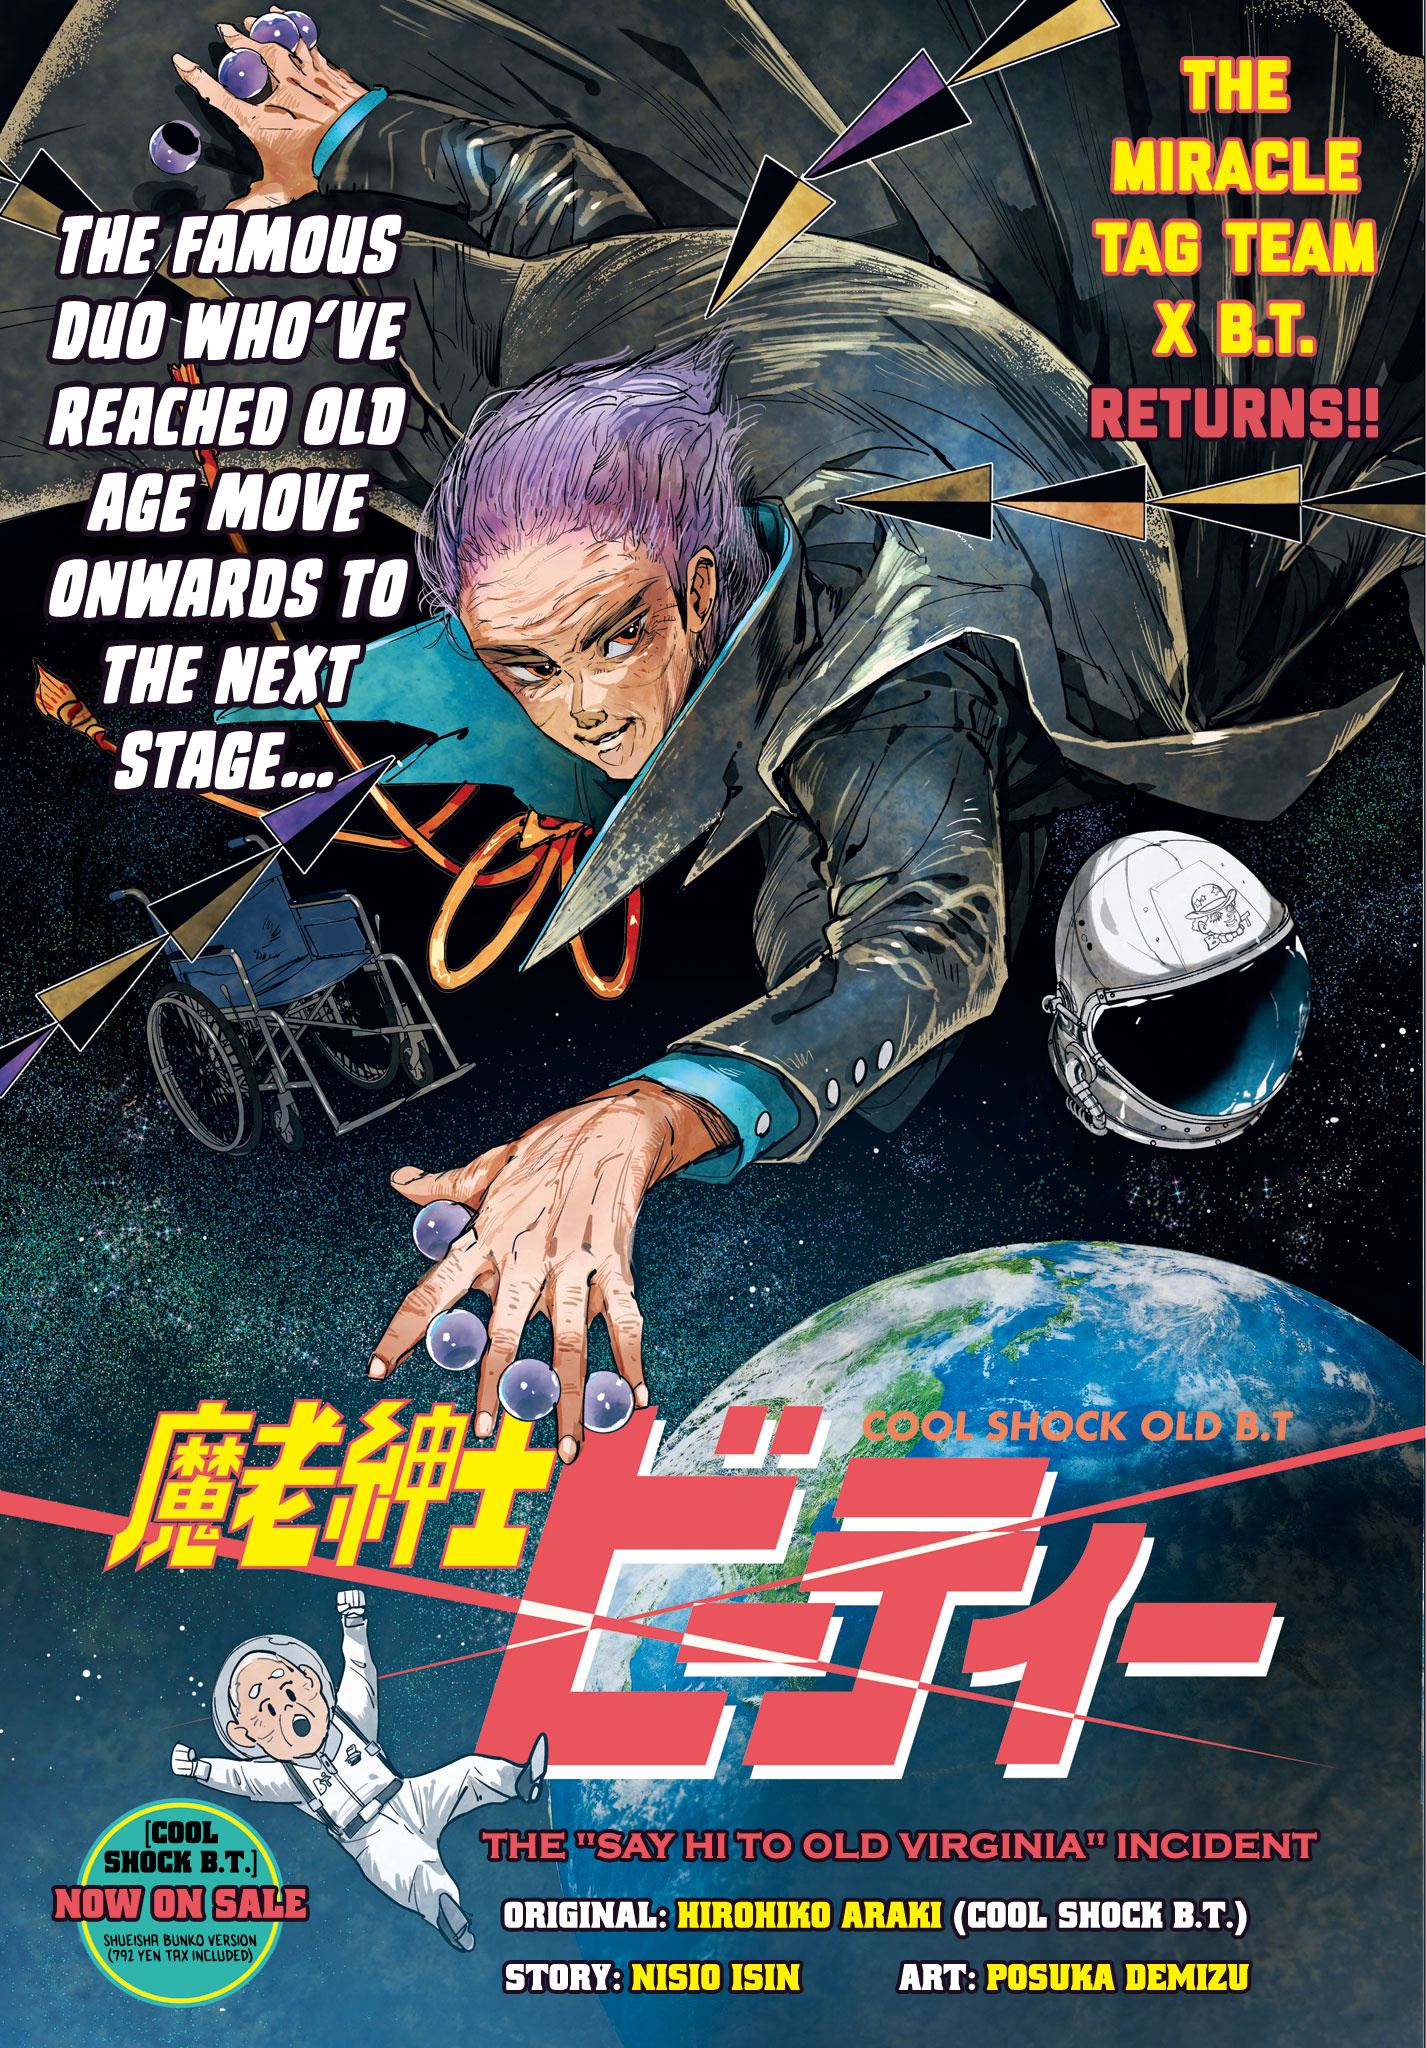 Cool Shock Old B.t. Vol.1 Chapter 2: The 